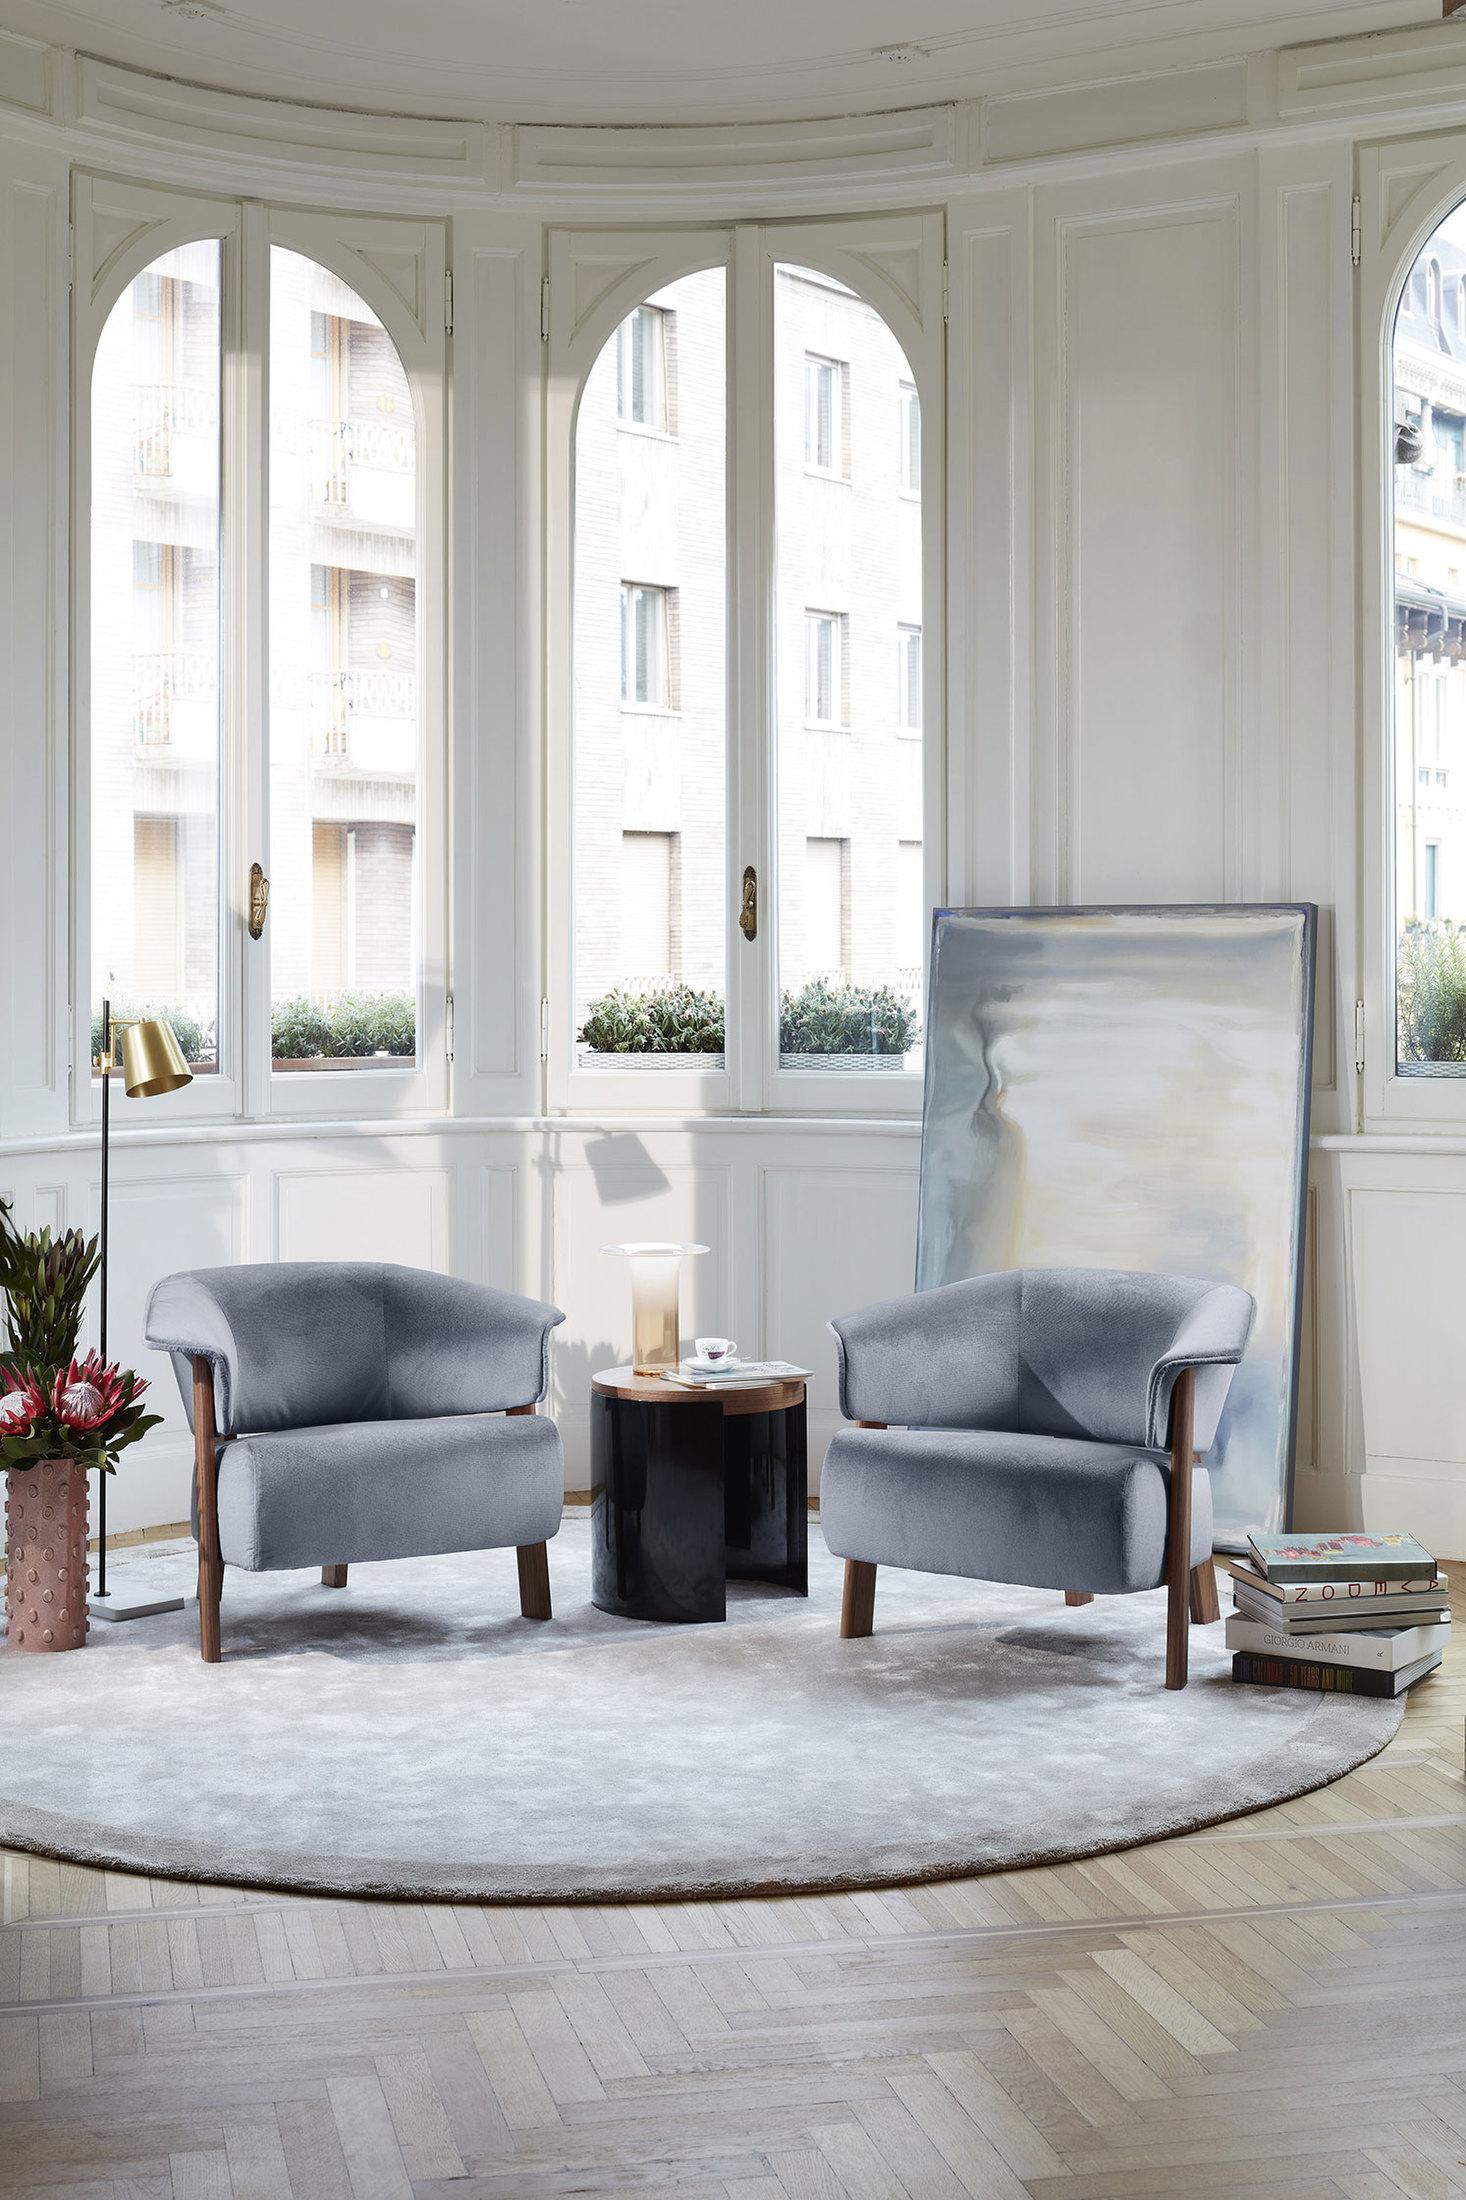 Prices vary dependent on the chosen material and color of the chair. 

Armchair designed by Patricia Urquiola in 2019. Manufactured by Cassina in Italy. This comfy armchair has the same distinctive aesthetics as the Back-Wing chair designed in 2018.